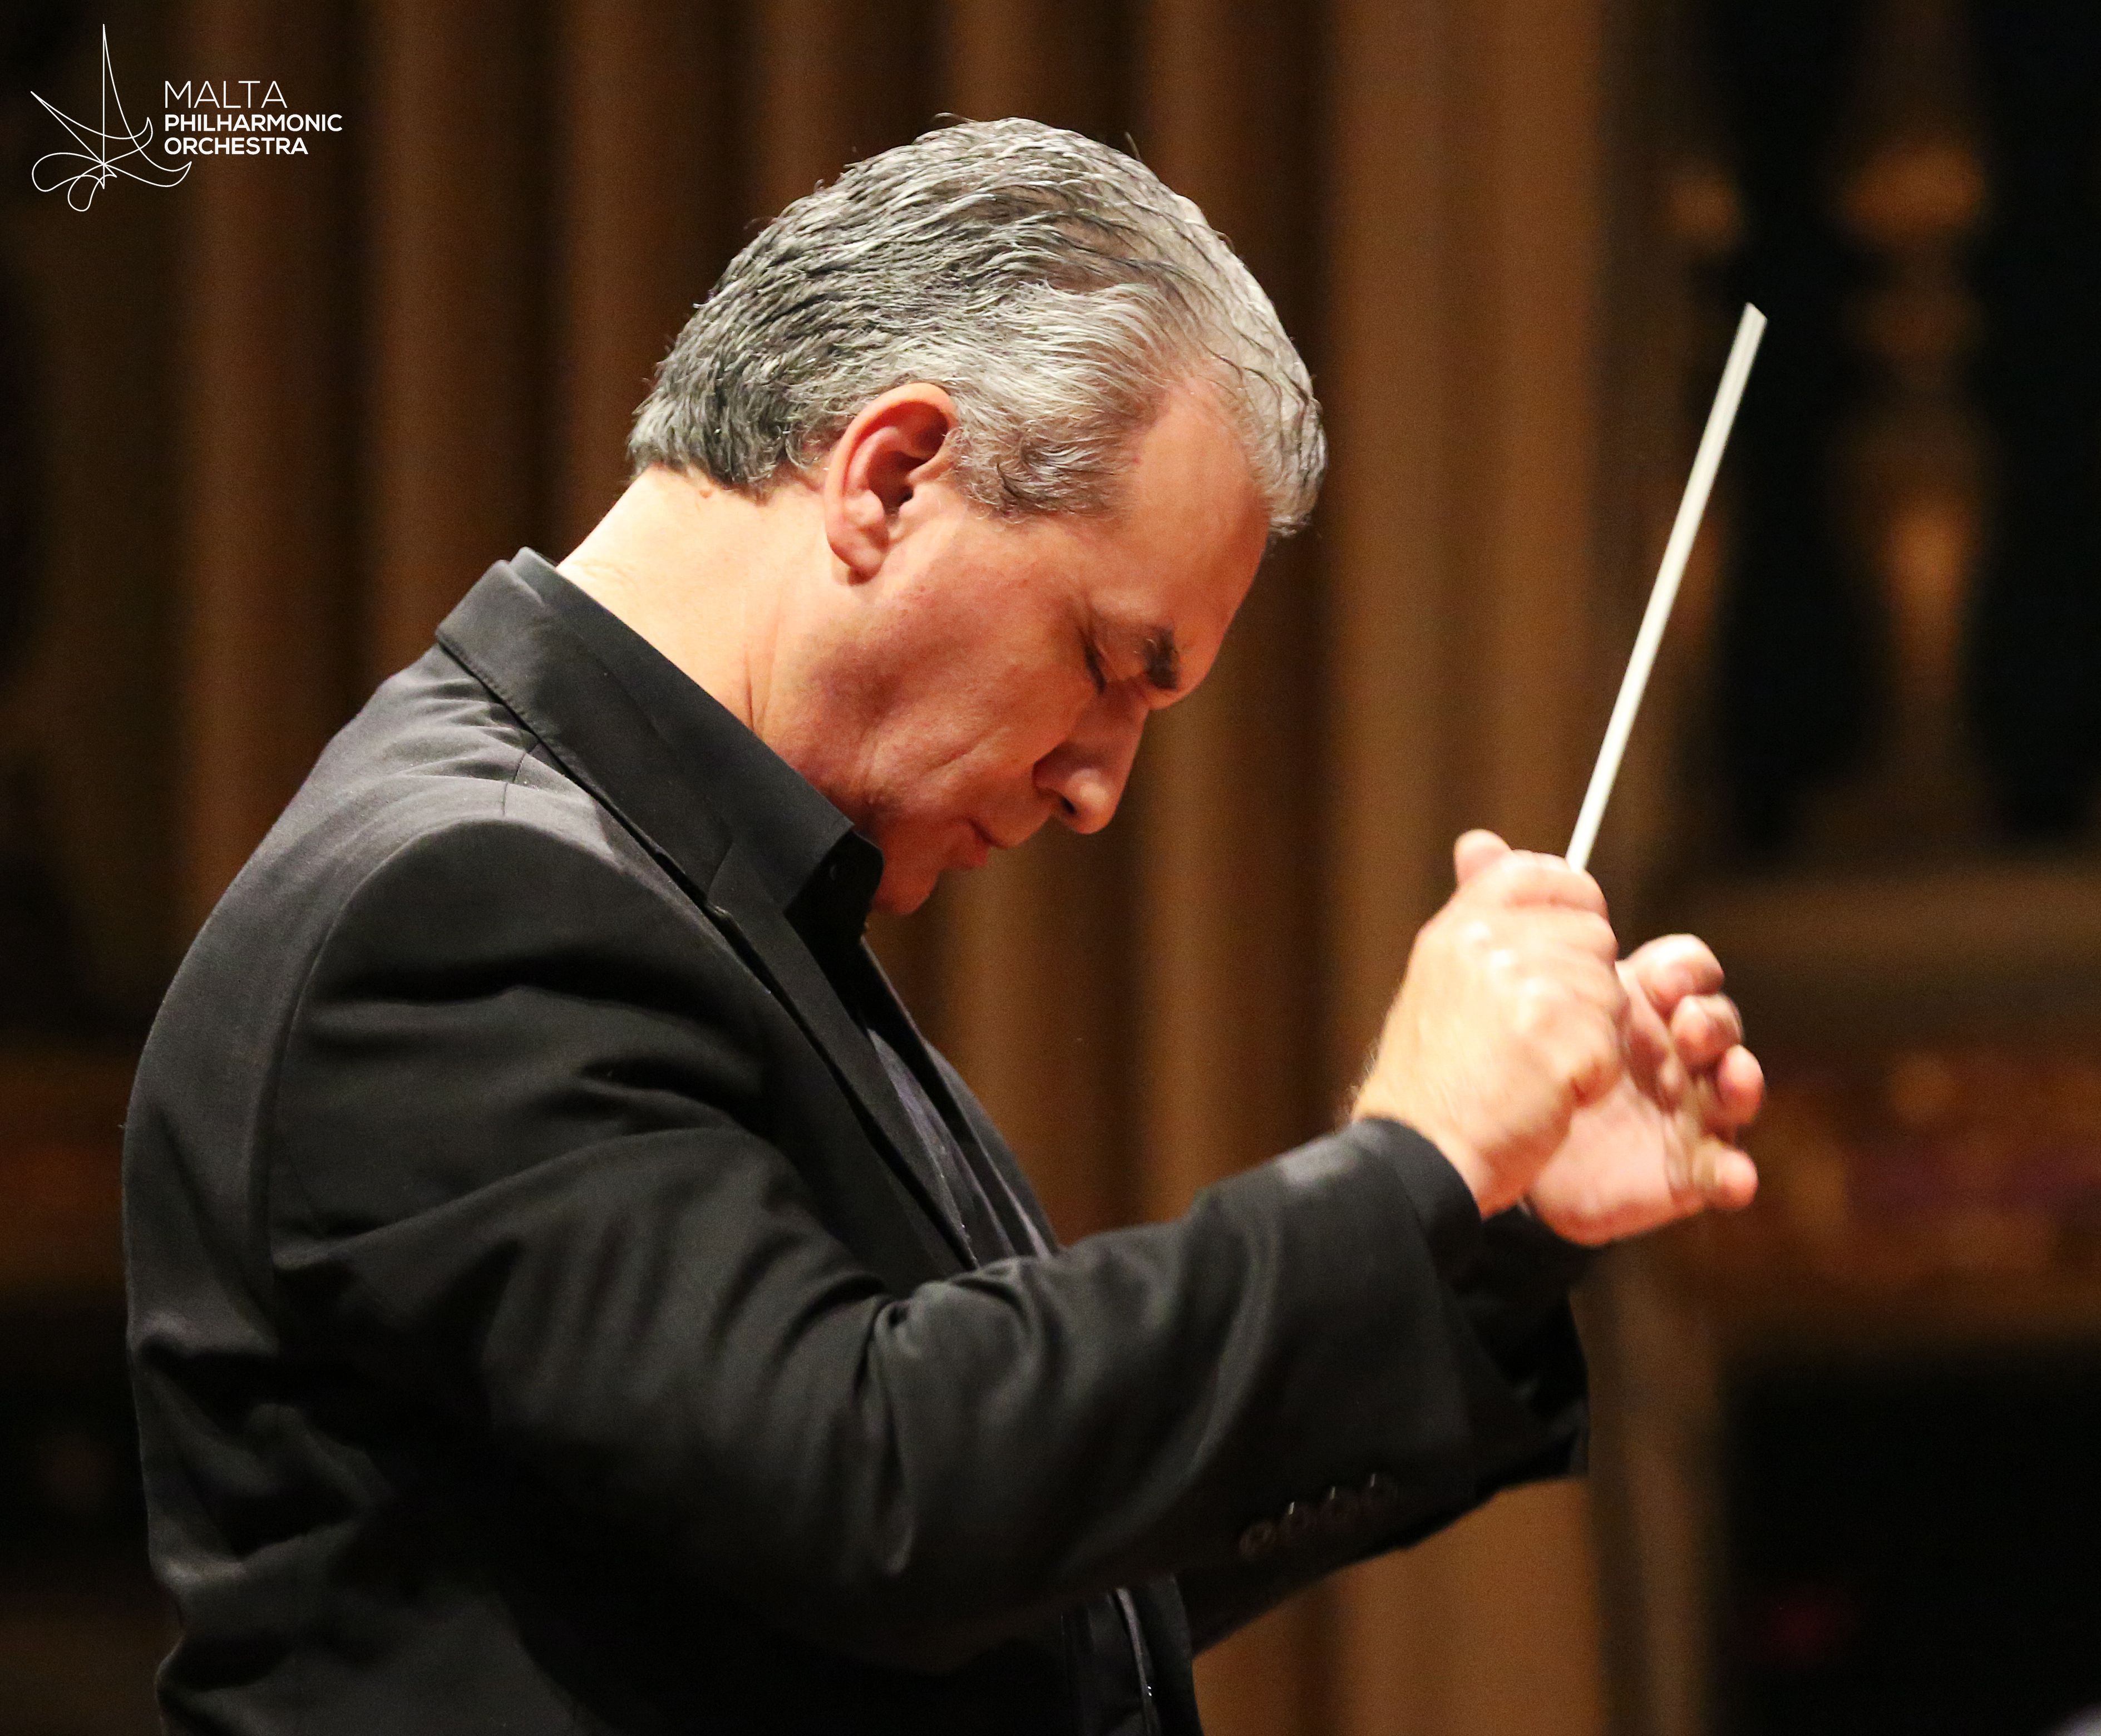 Orchestra Resident Conductor Michael Laus